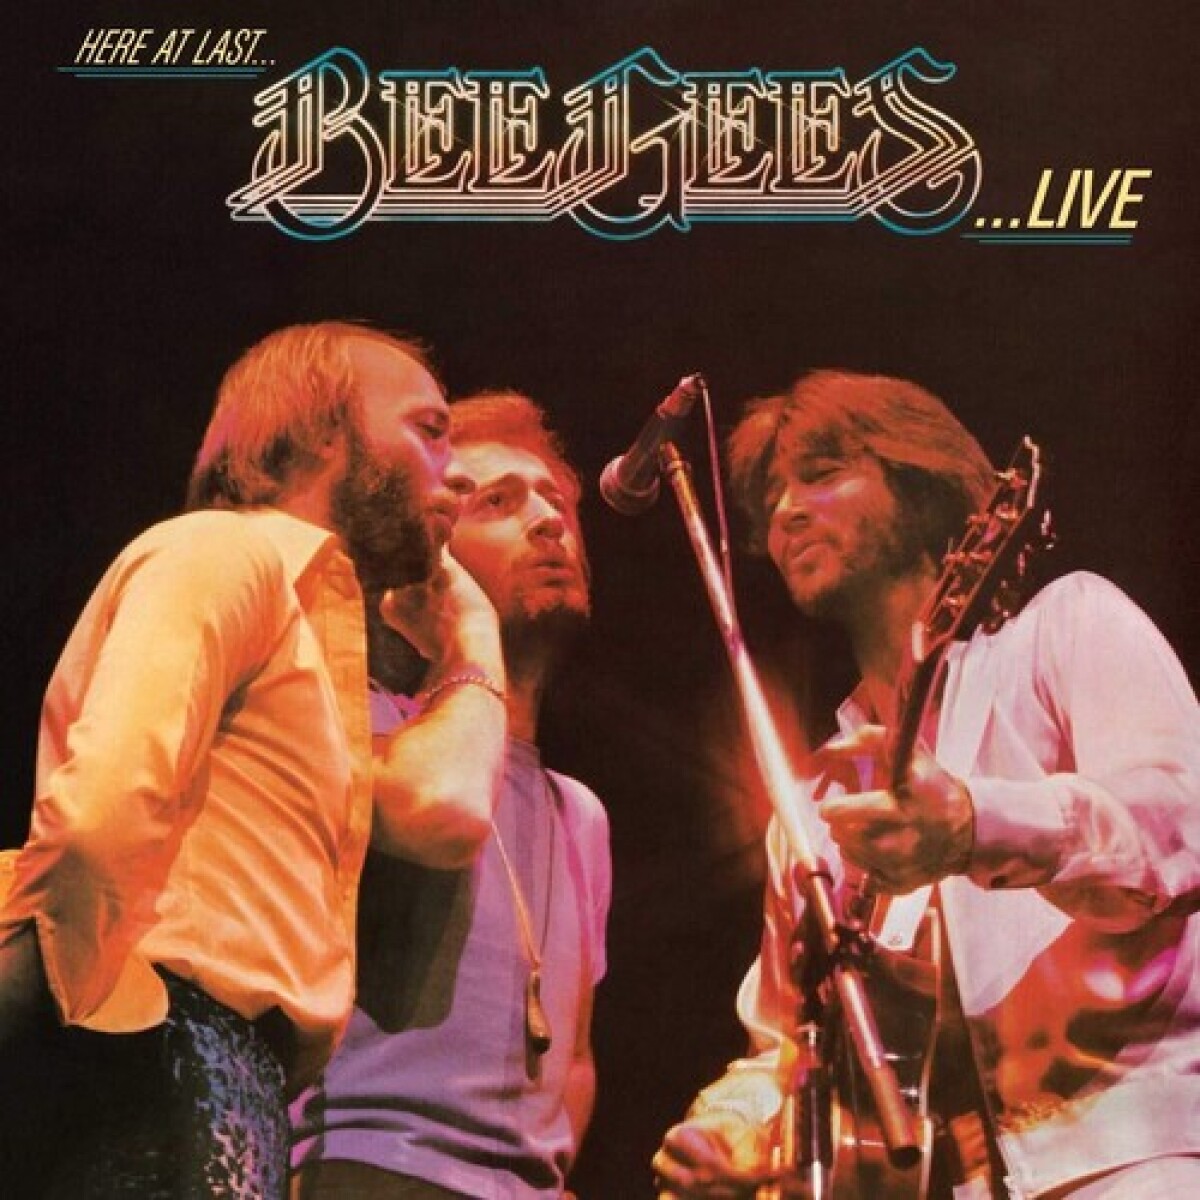 Bee Gees - Here At Last: Bee Gees Live - Vinilo 